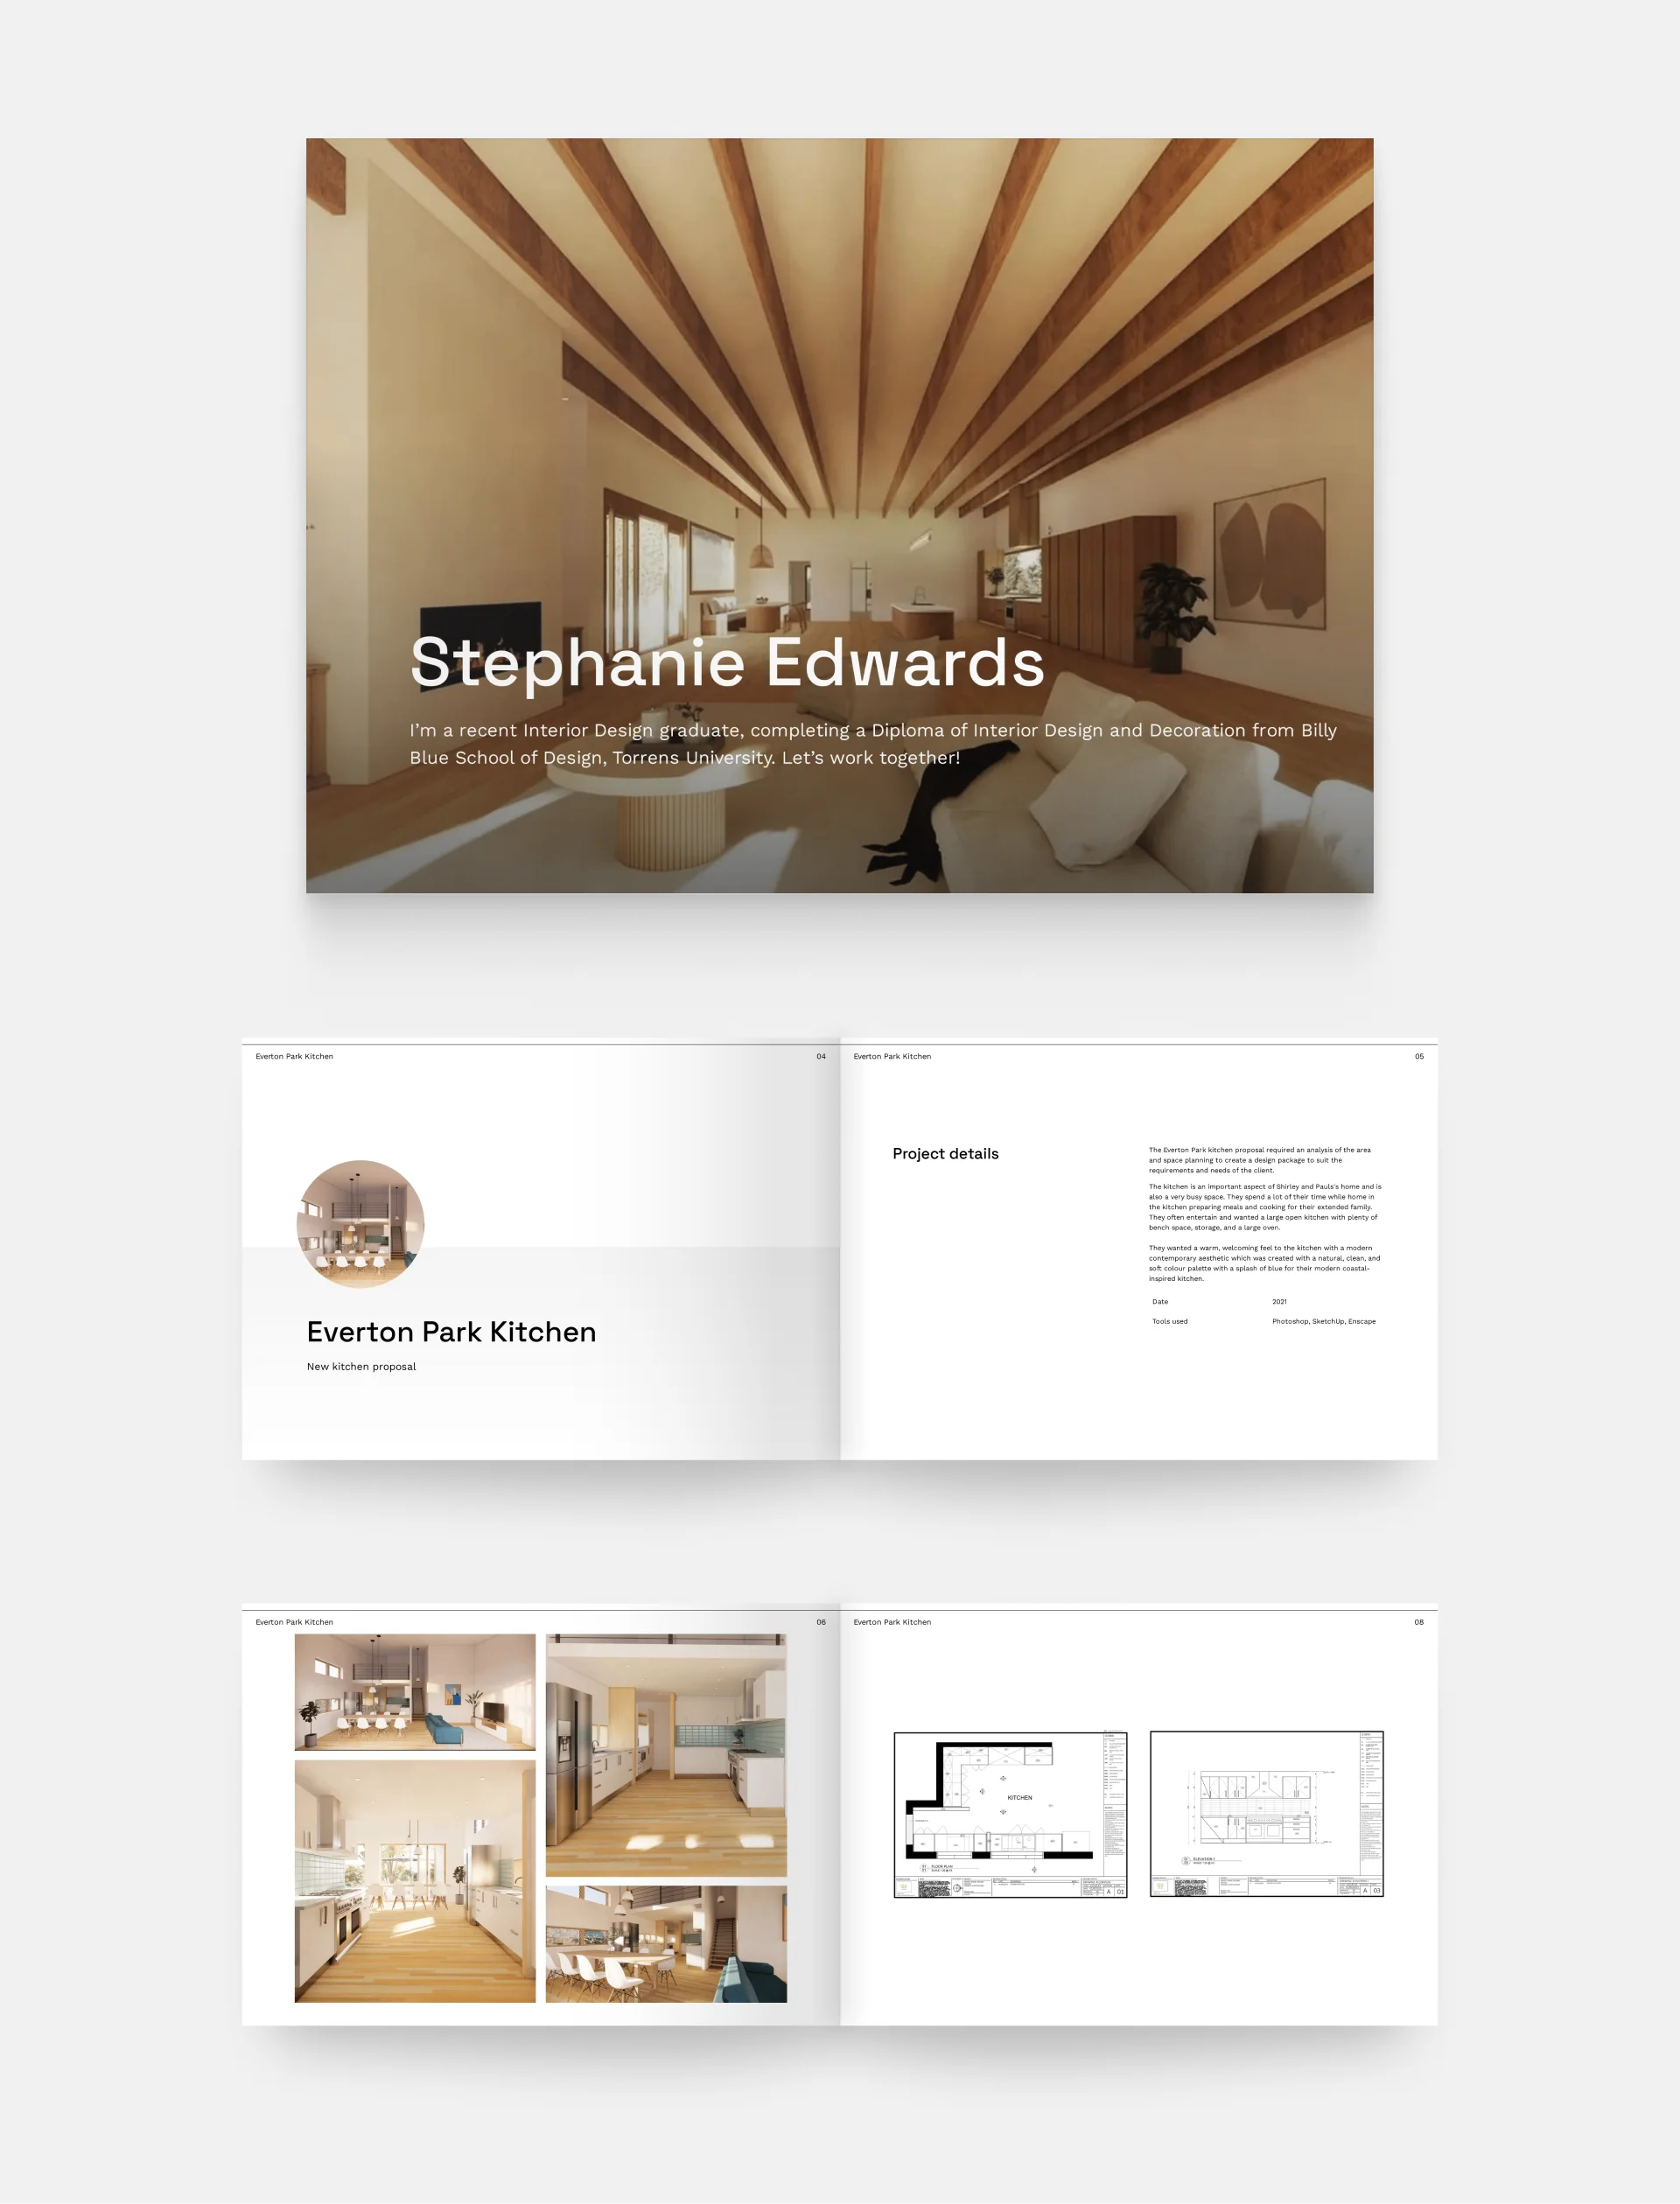 Screenshot of the PDF interior design portfolio cover, and then 4 more pages from Stepheni's project pages